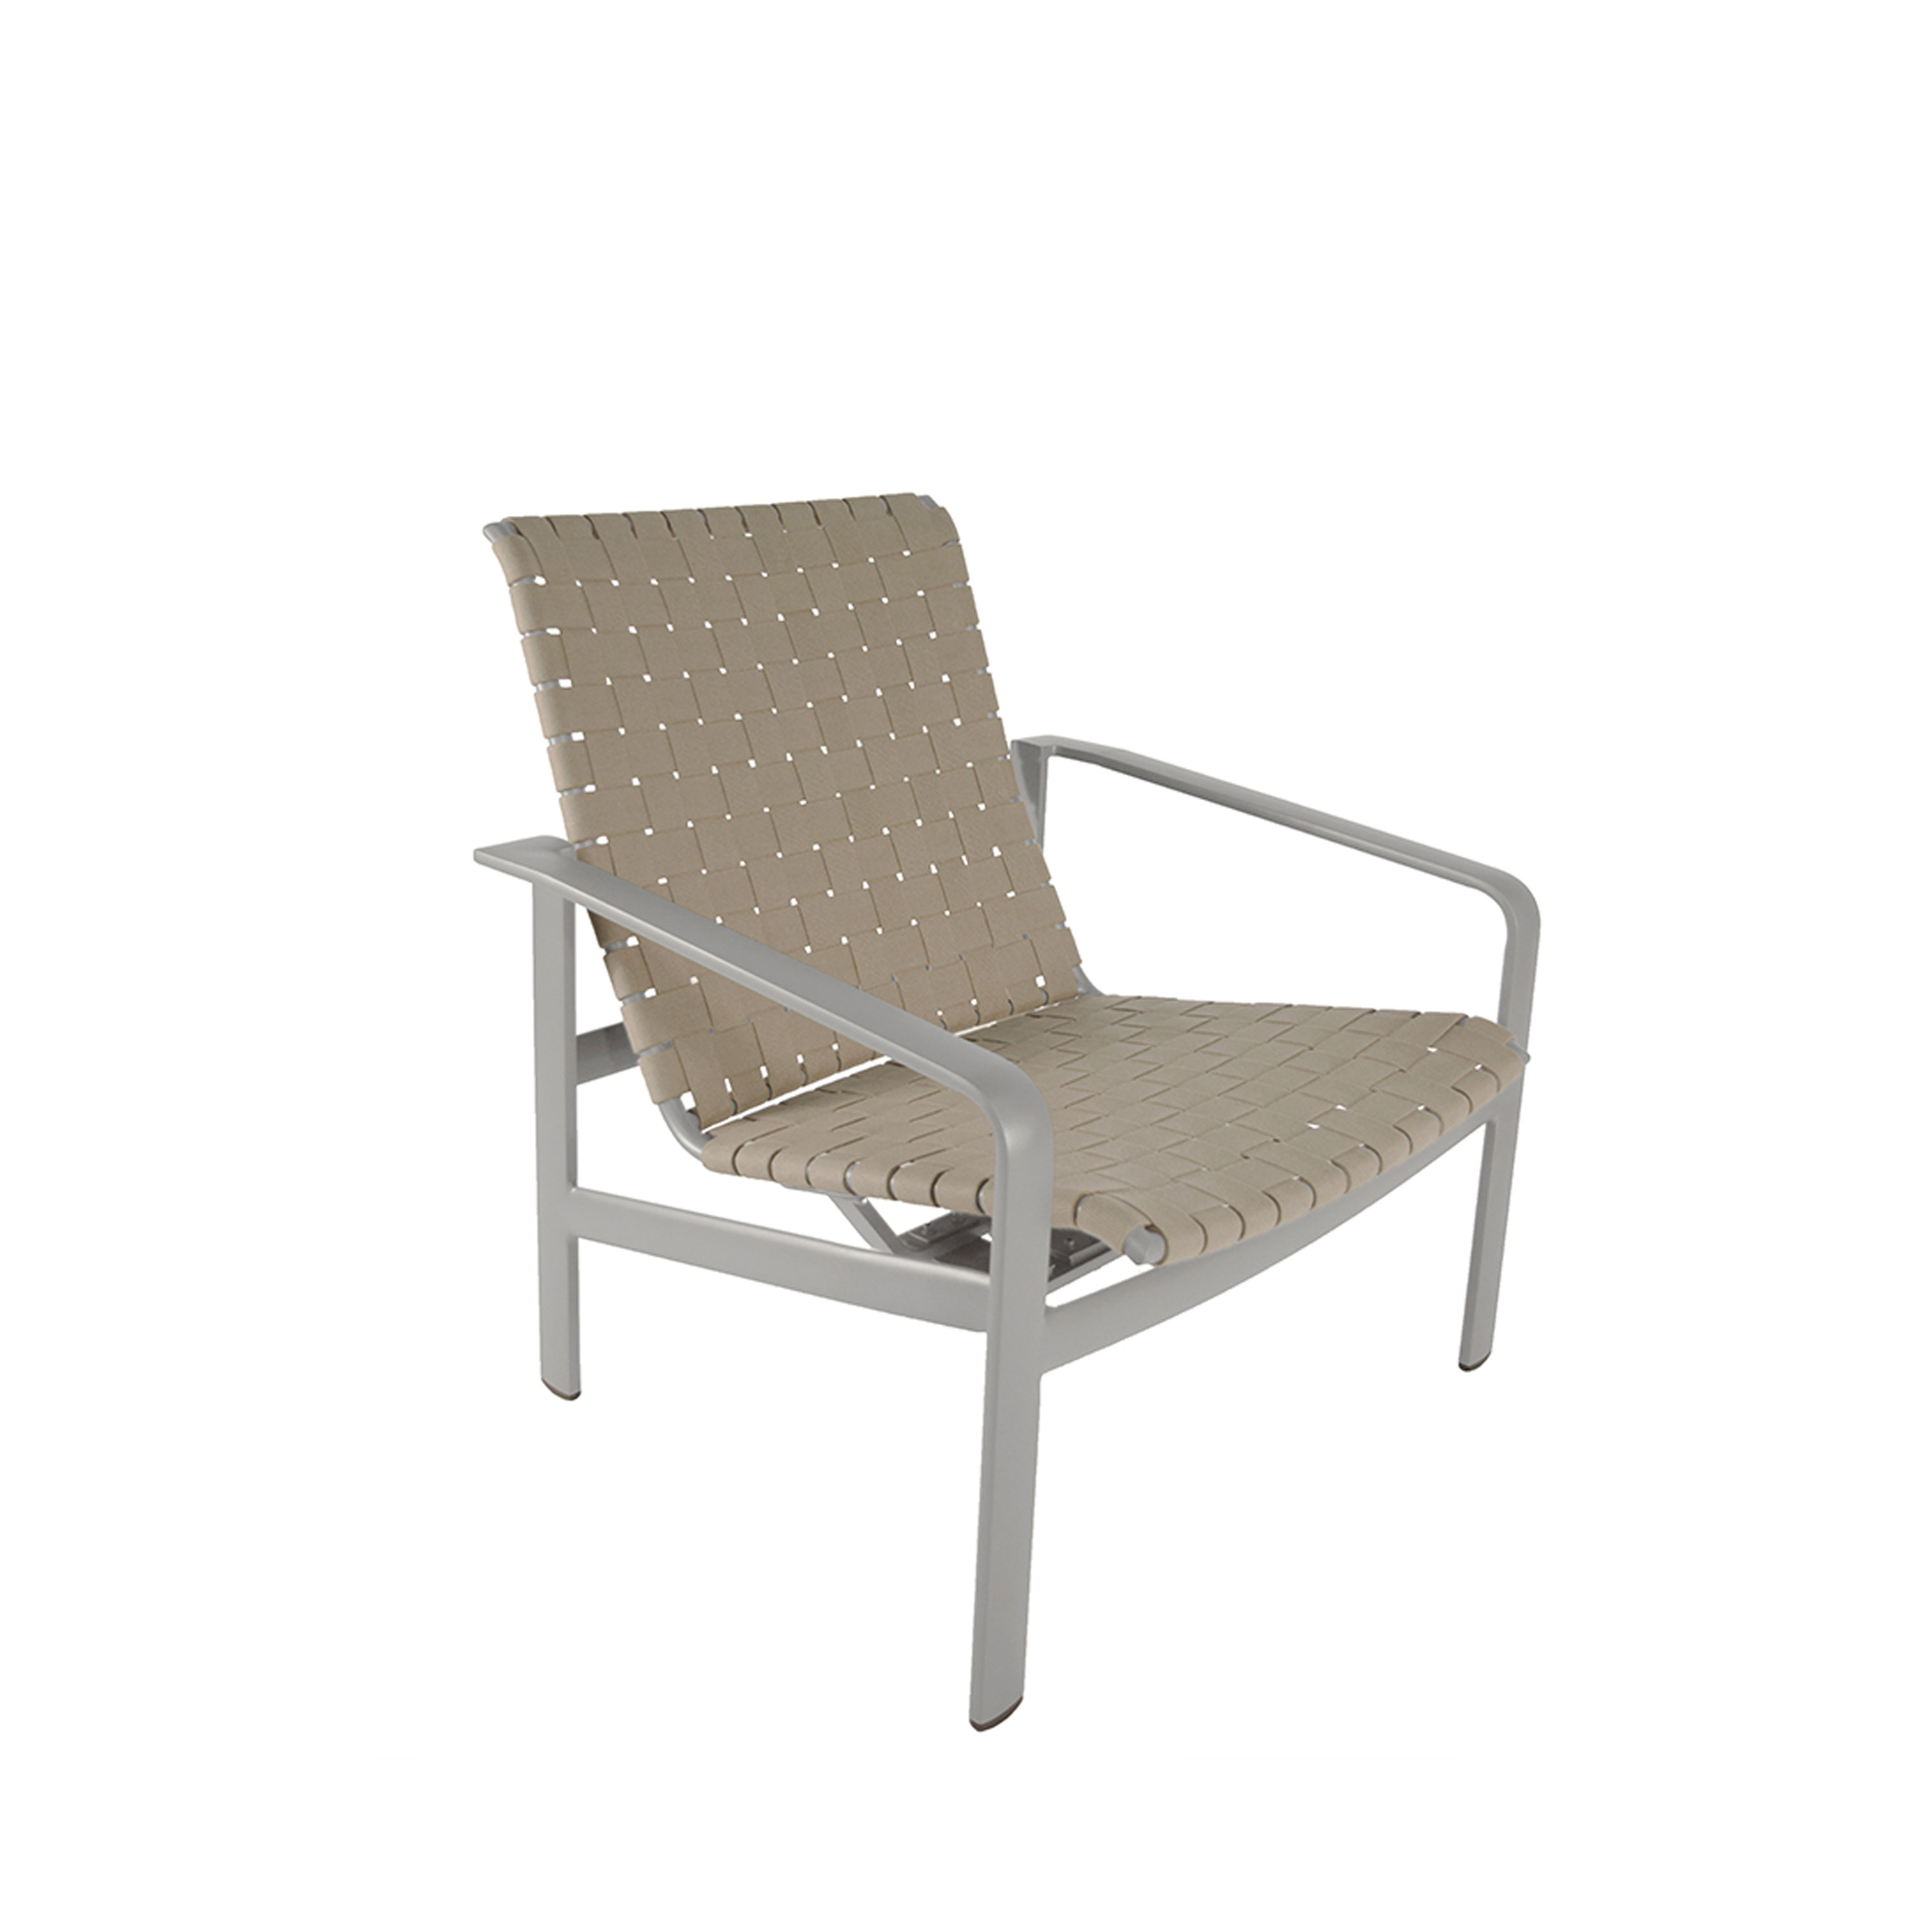 Woven-Strap-Motion-Outdoor-Chair